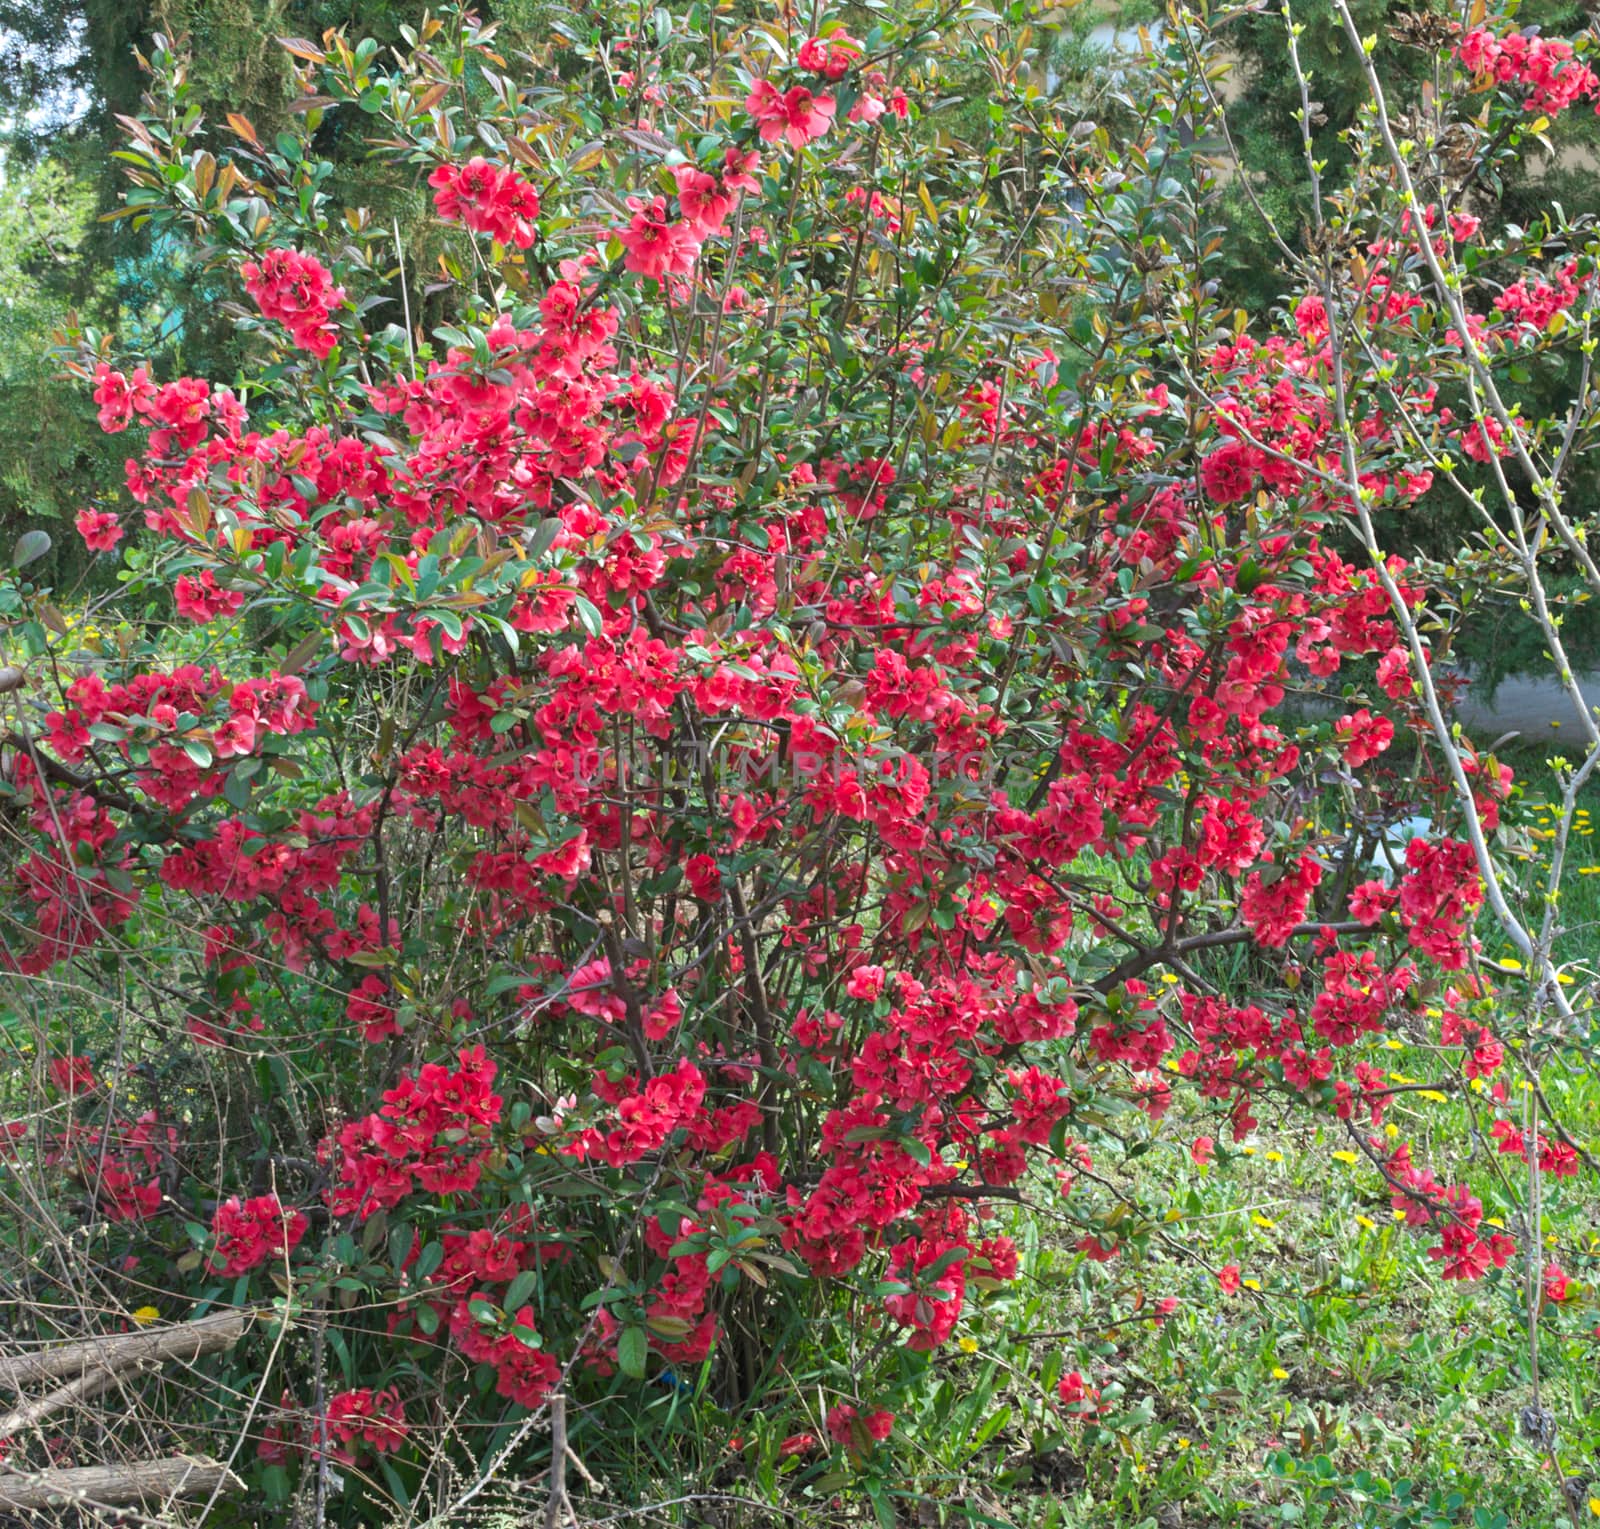 Bush blossoming with red flowers at spring time by sheriffkule